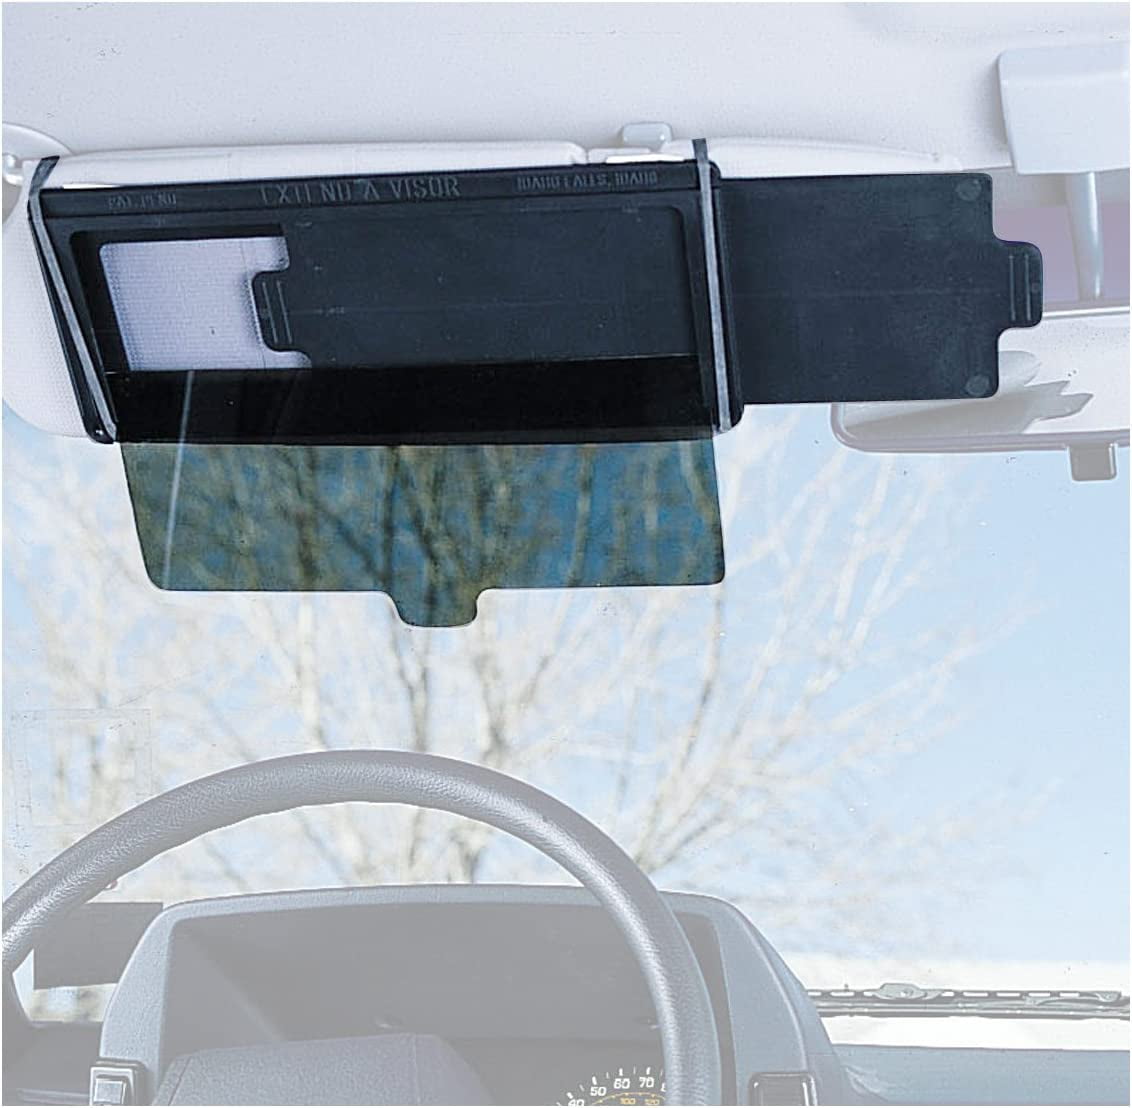 Sliding Car Visor Extender with Tinted Screen to Reduce Glare